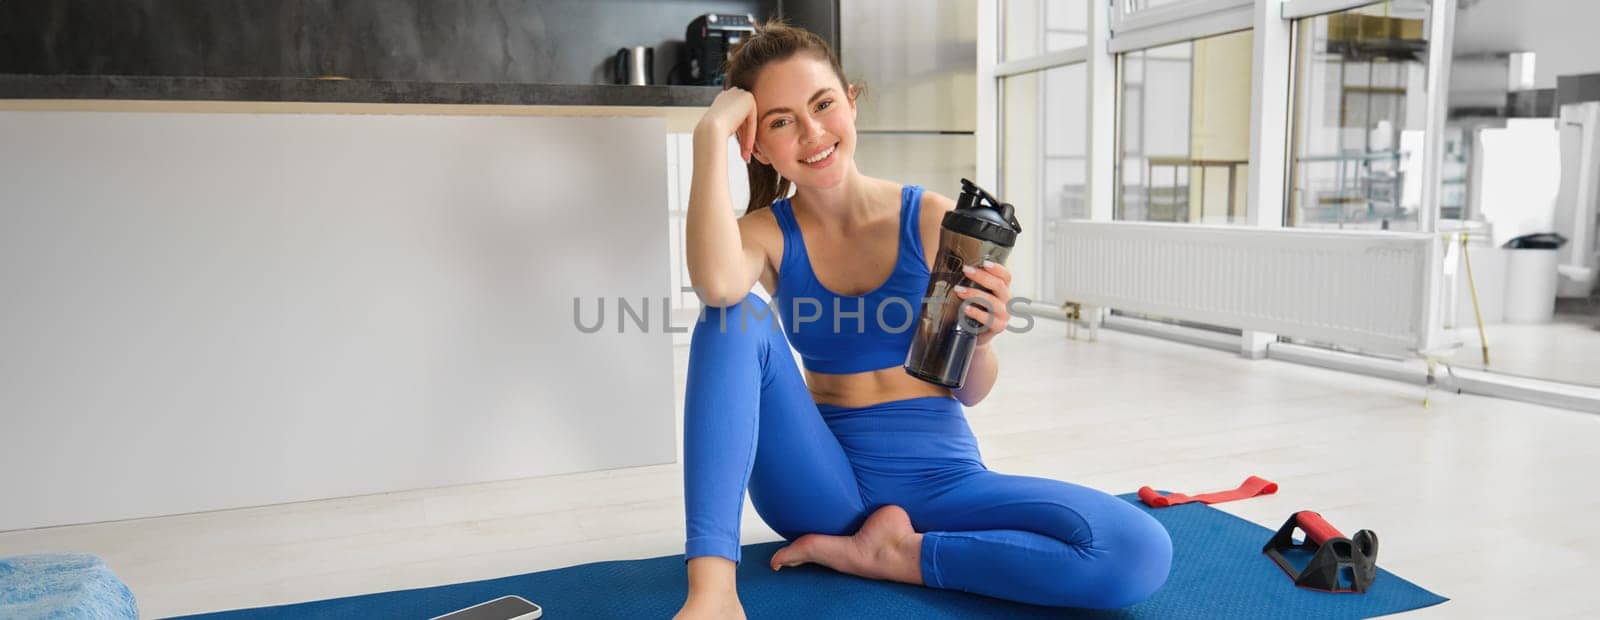 Portrait of smiling fitness instructor, drinks water from bottle, sits on yoga mat, workout from home.